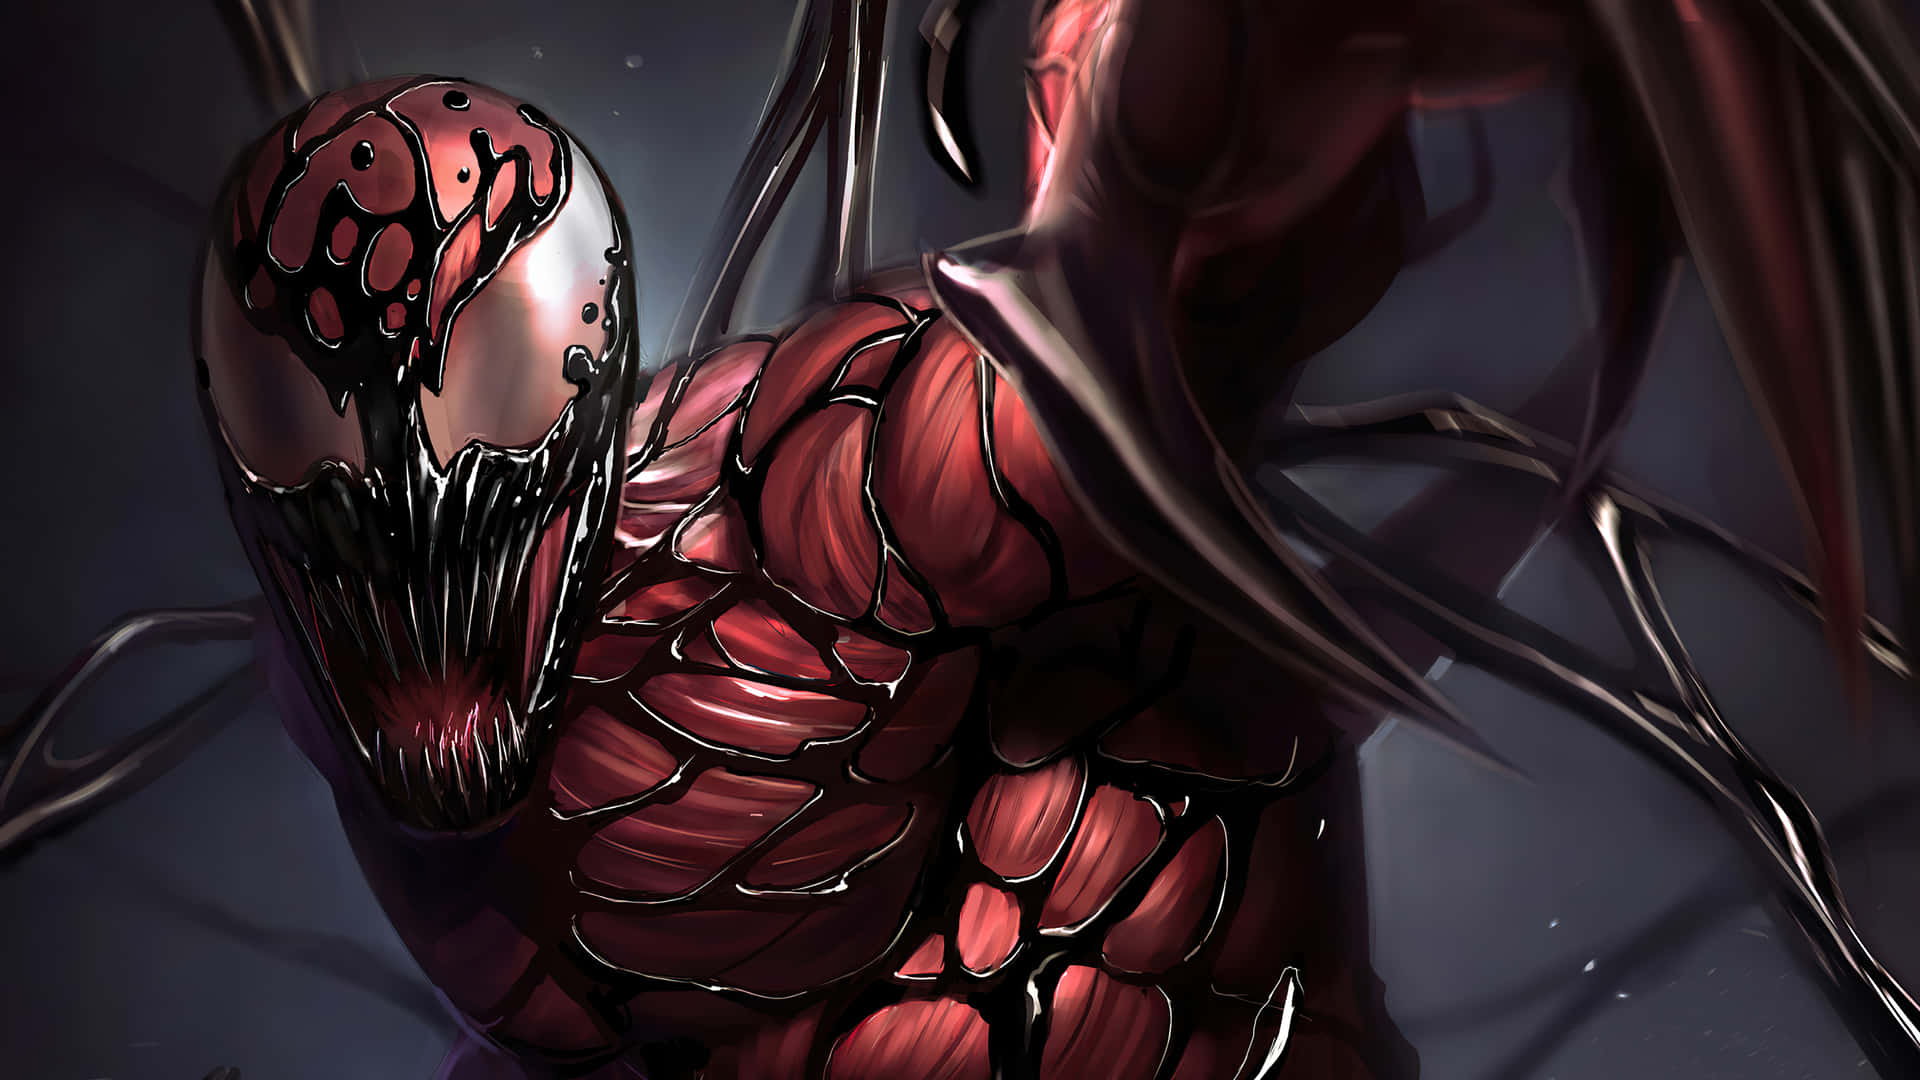 Carnage Unleashed - Marvel's Menacing Symbiote in Action